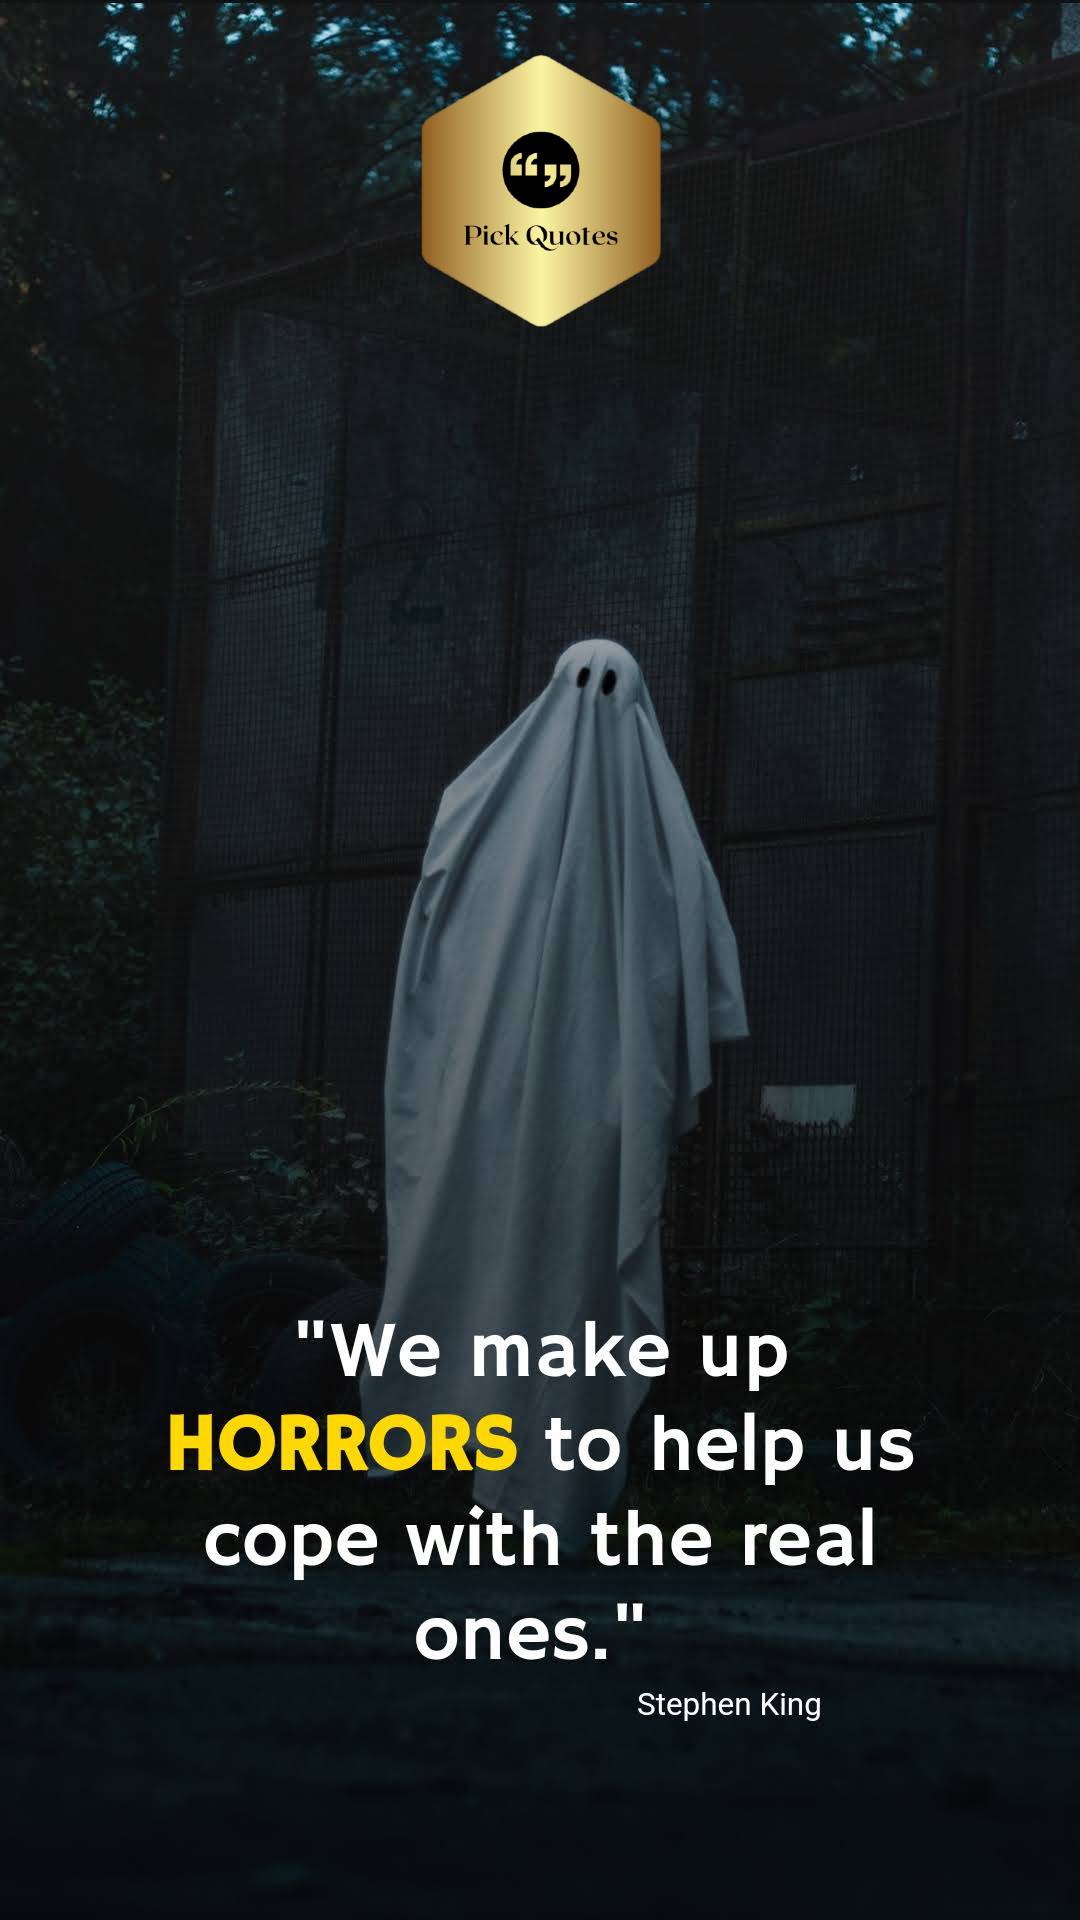 Best short Halloween Quotes From Movies thepickquotes.com 5